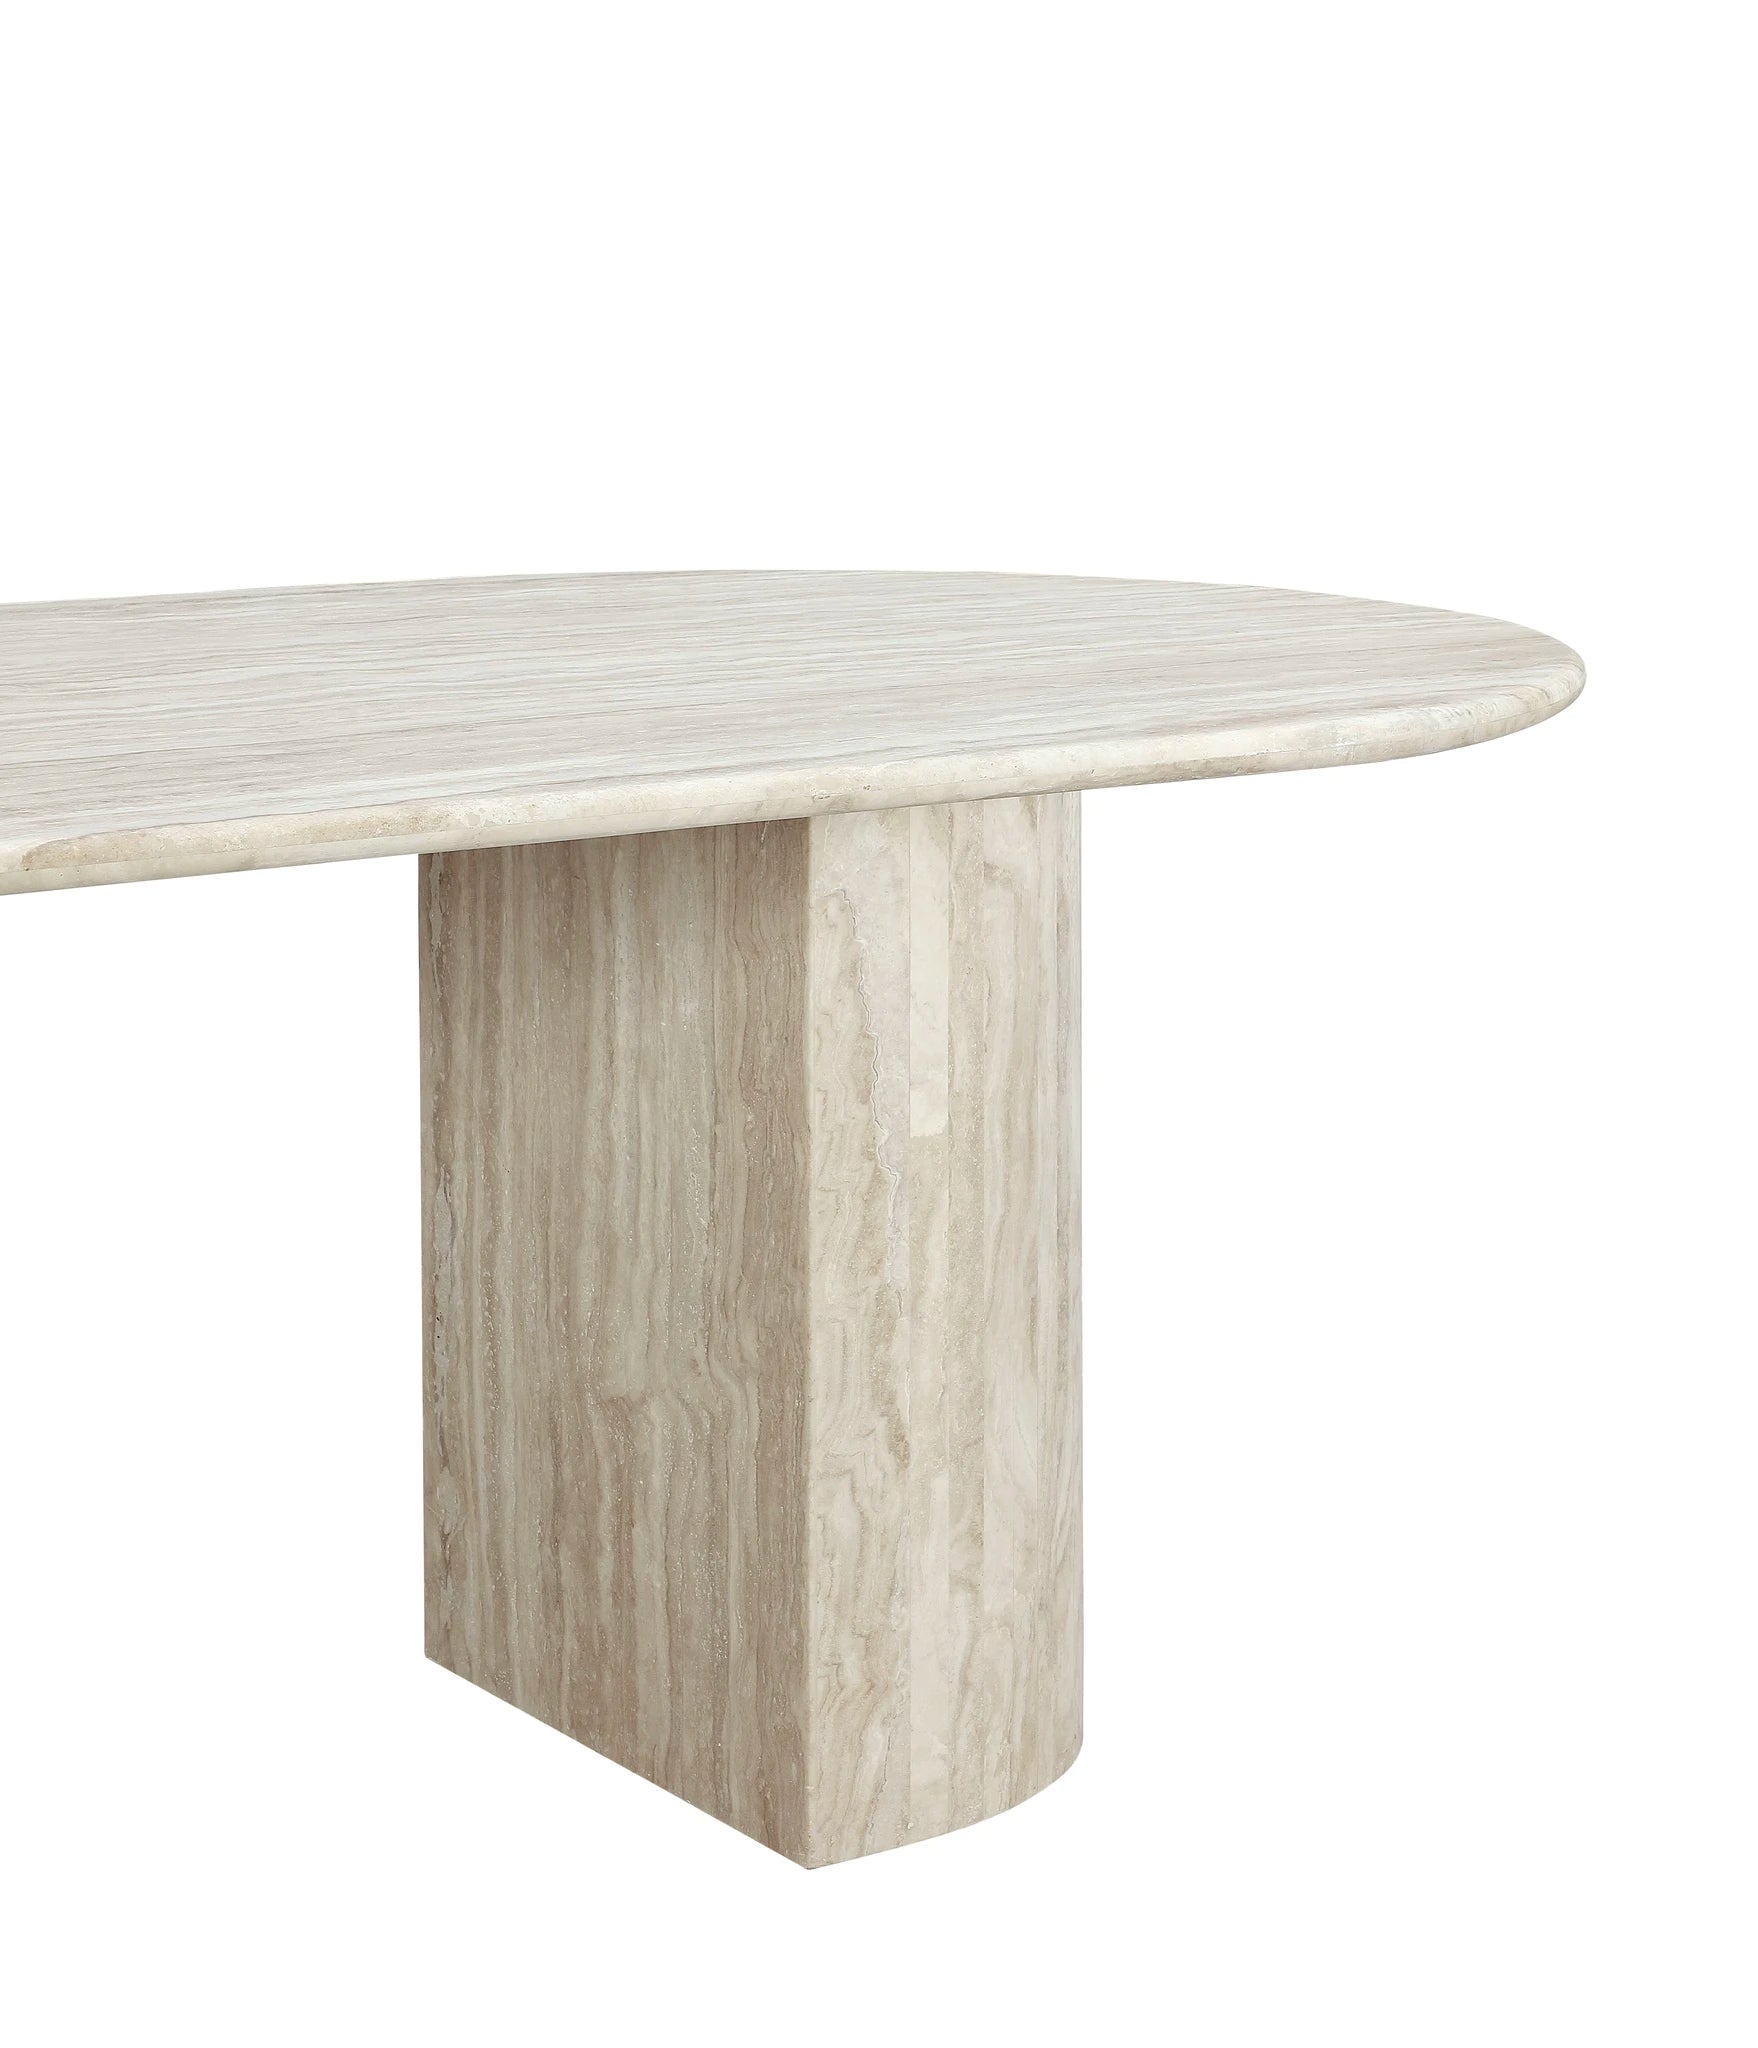 Travertine Oval Dining Table